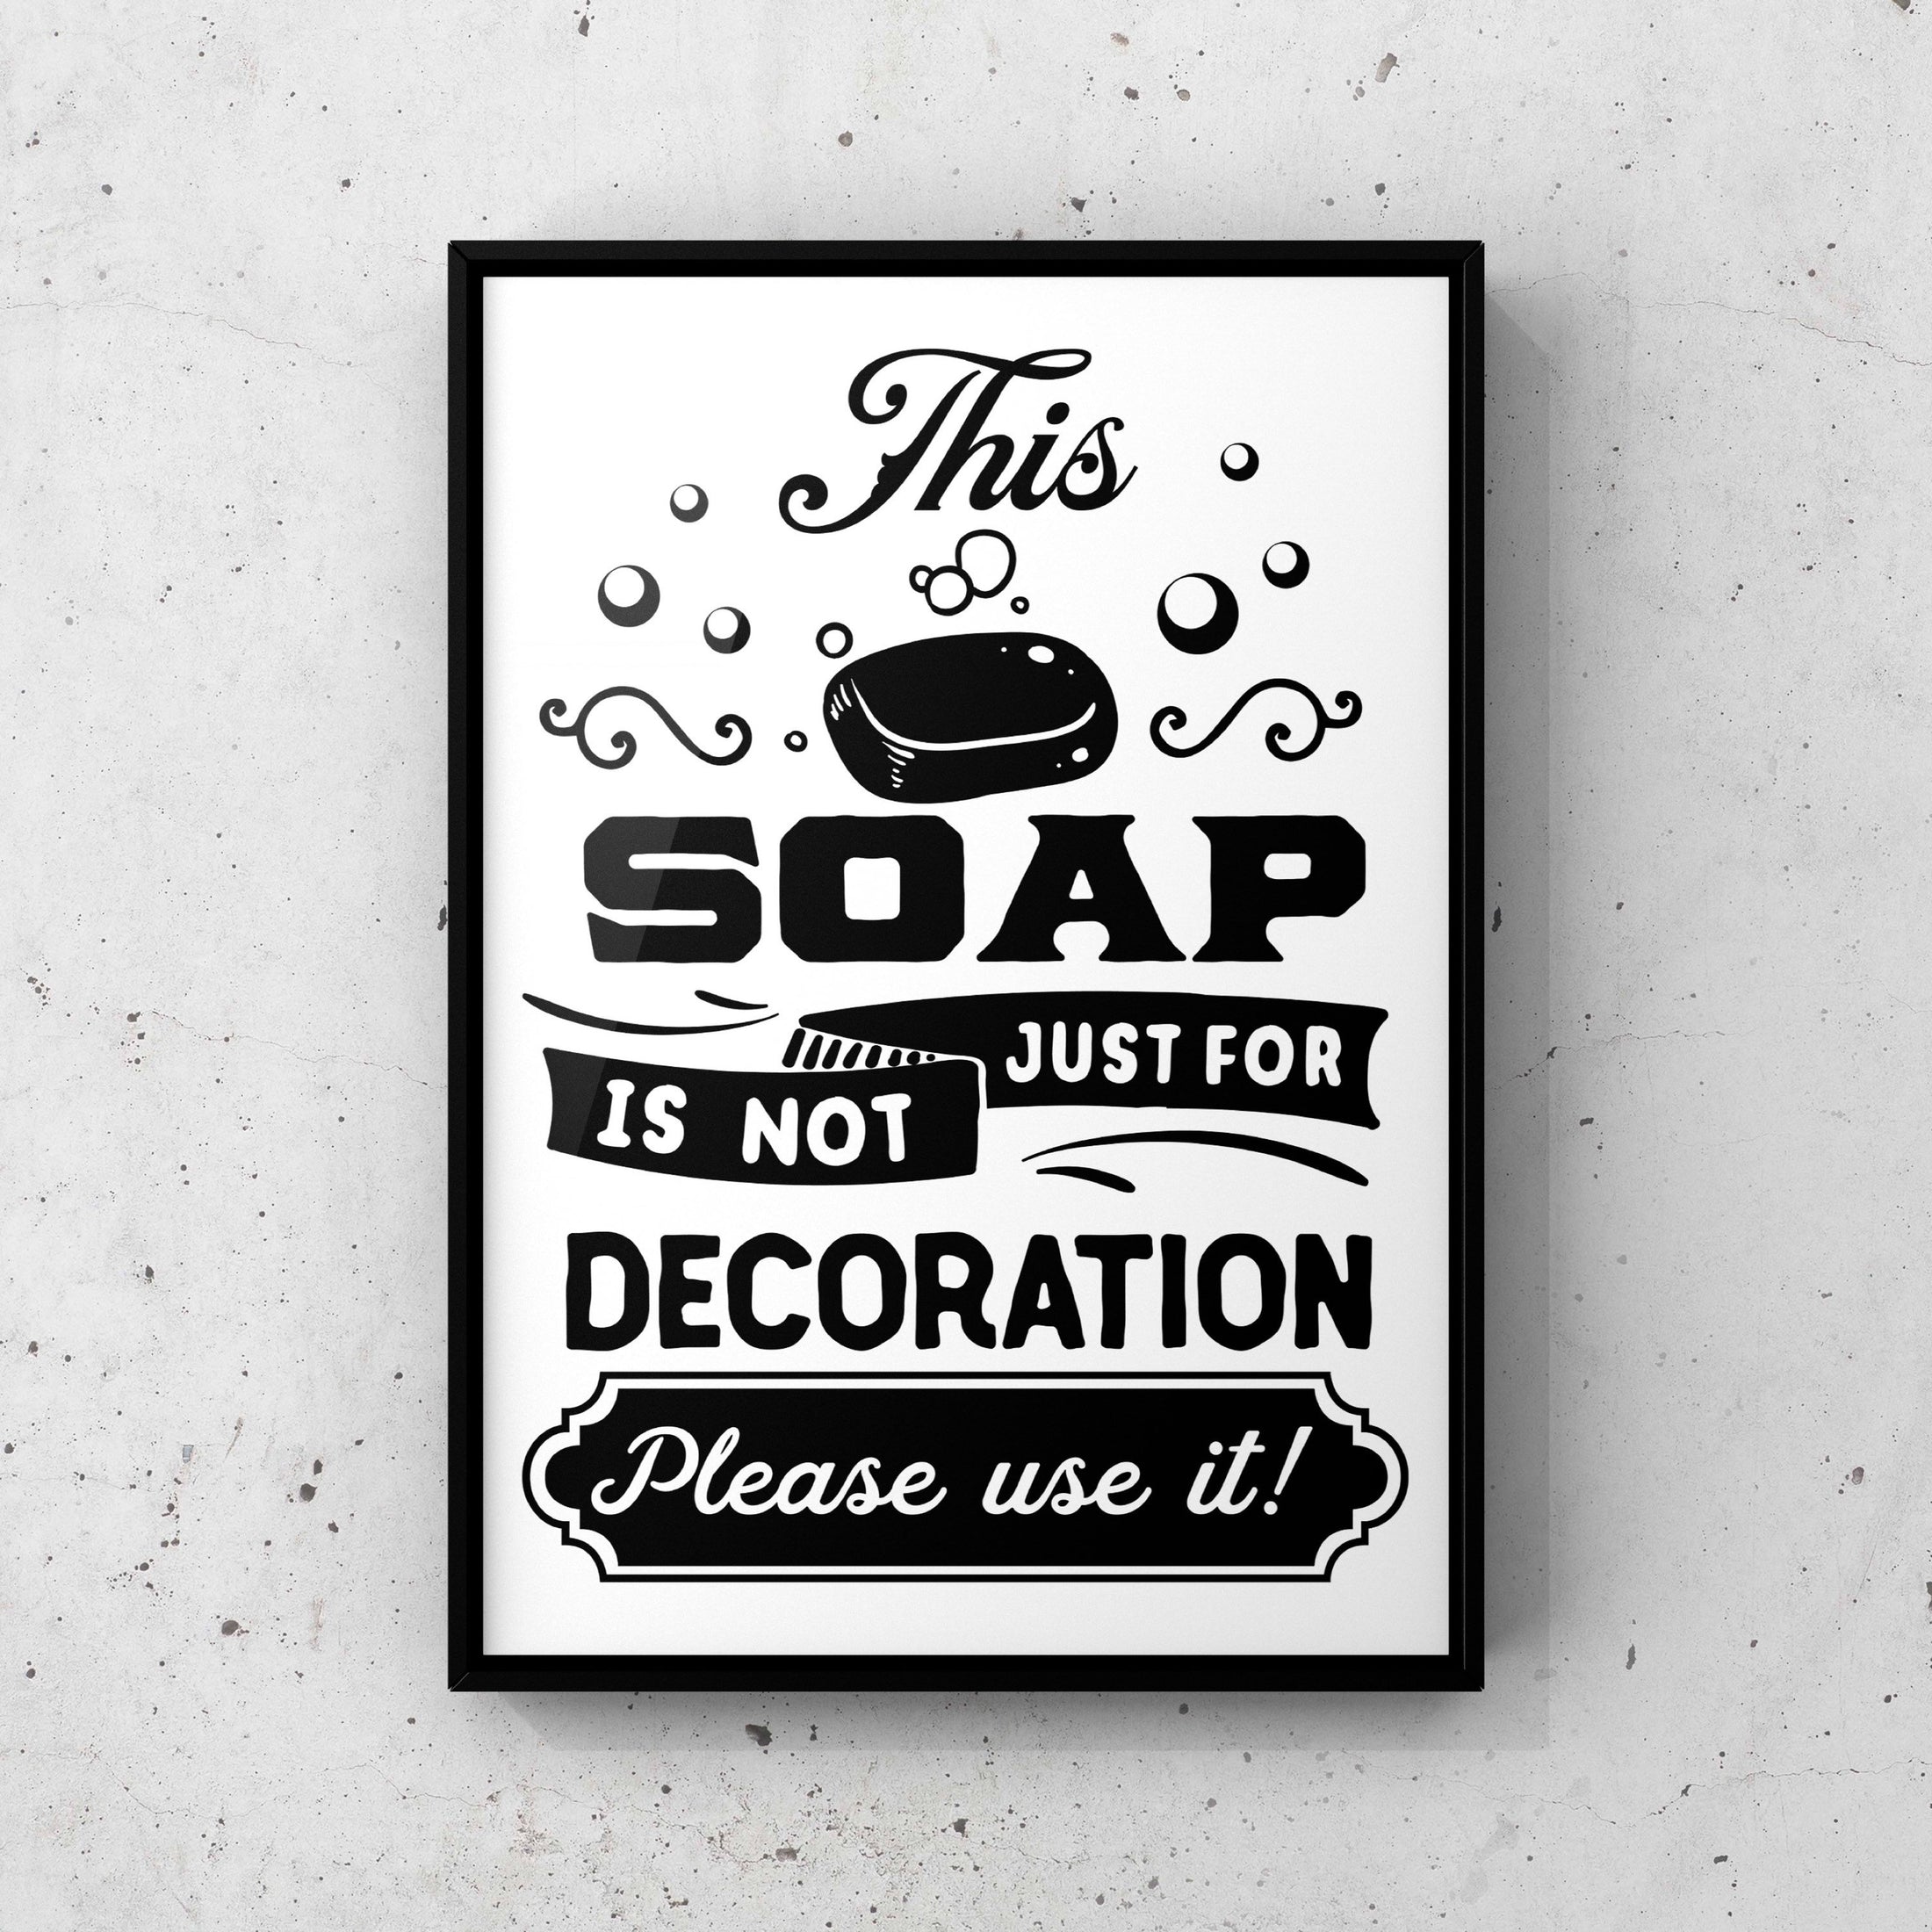 Soap is not for decoration